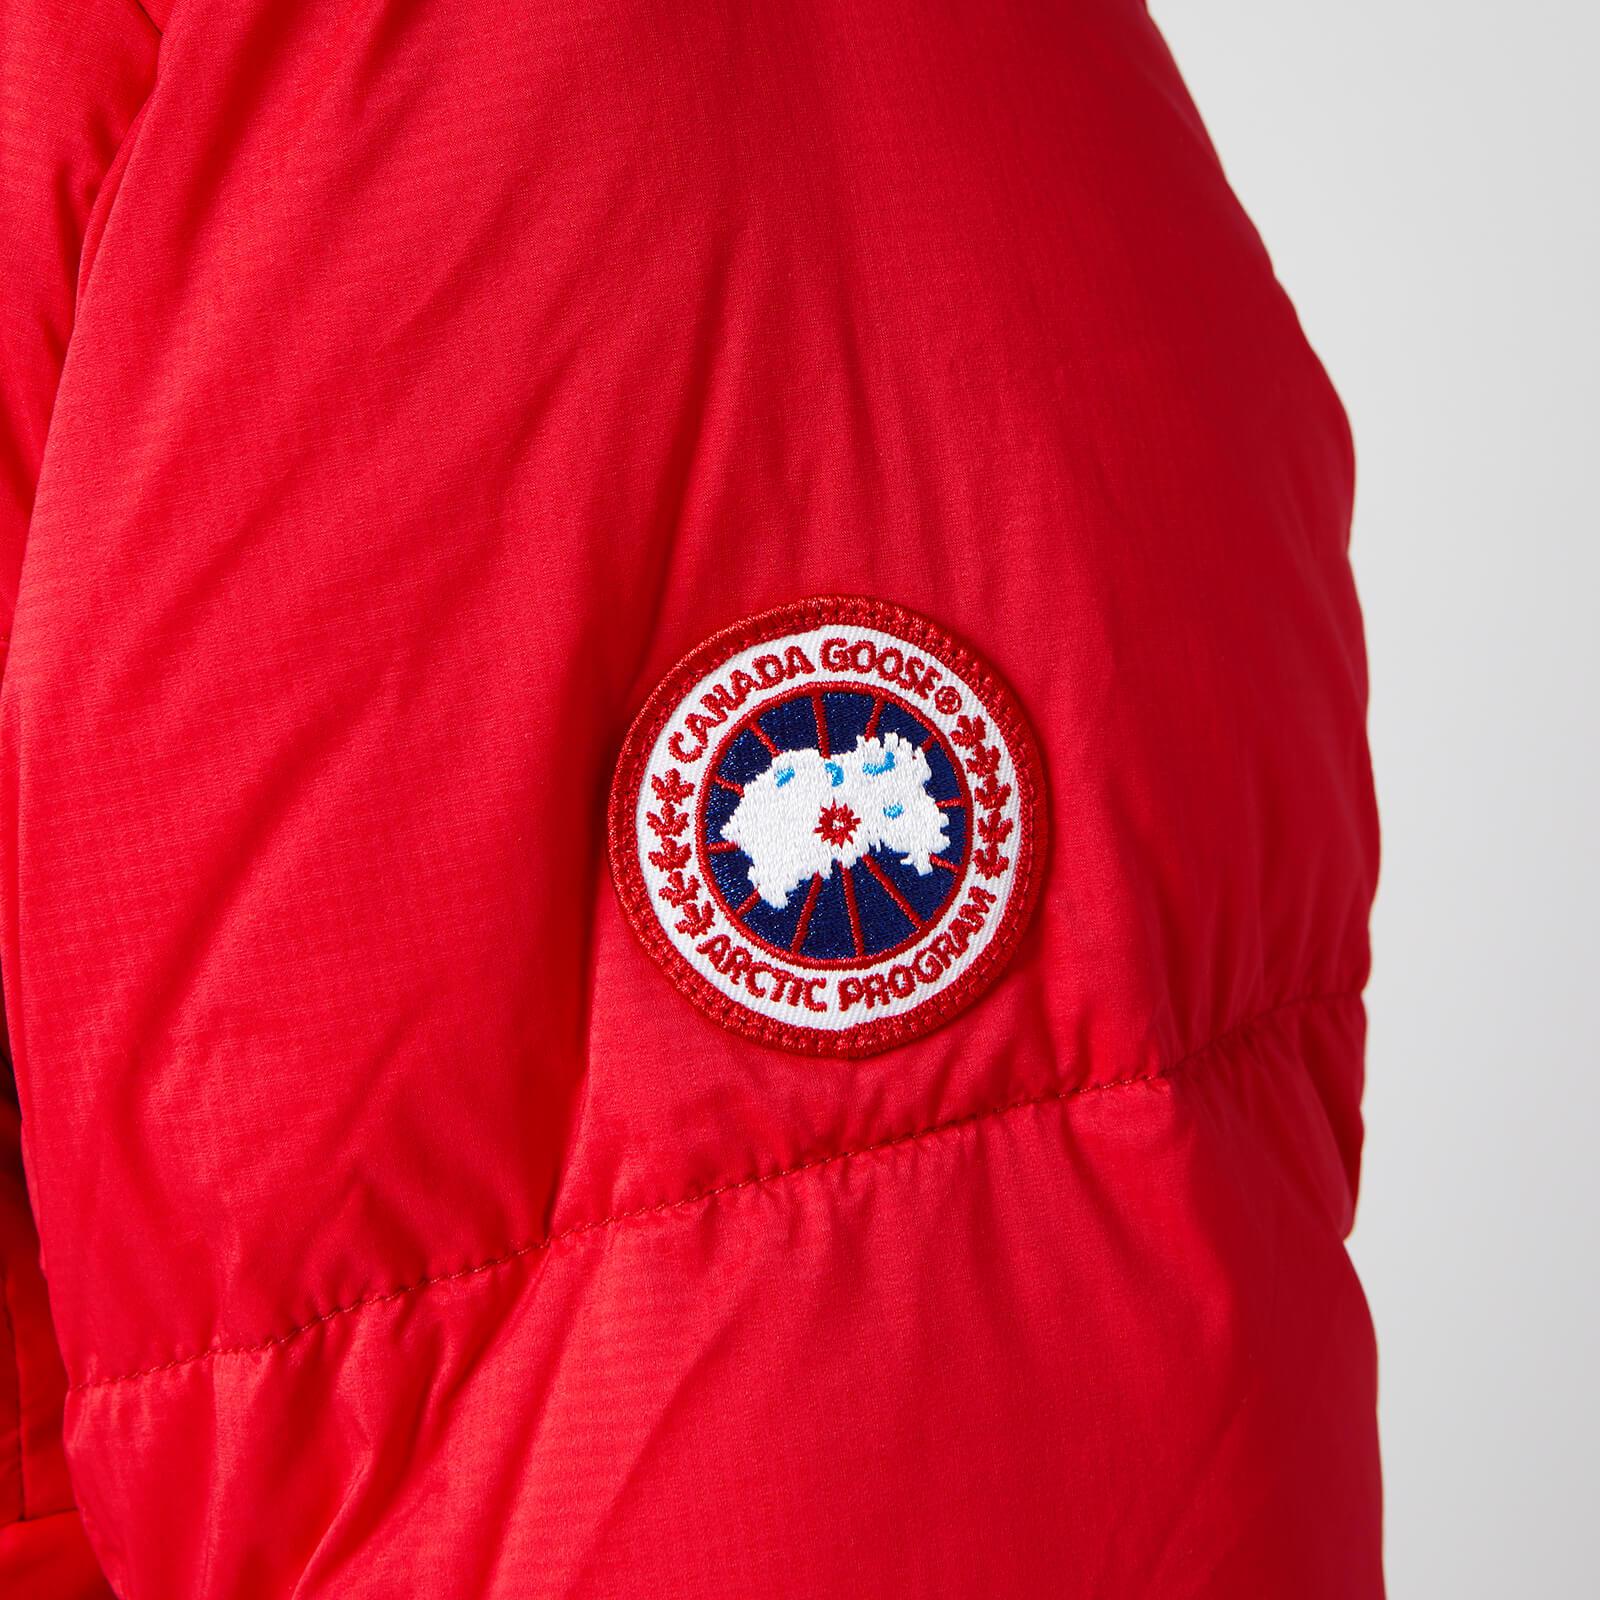 Canada Goose Goose Armstrong Hoody in Red for Men - Lyst